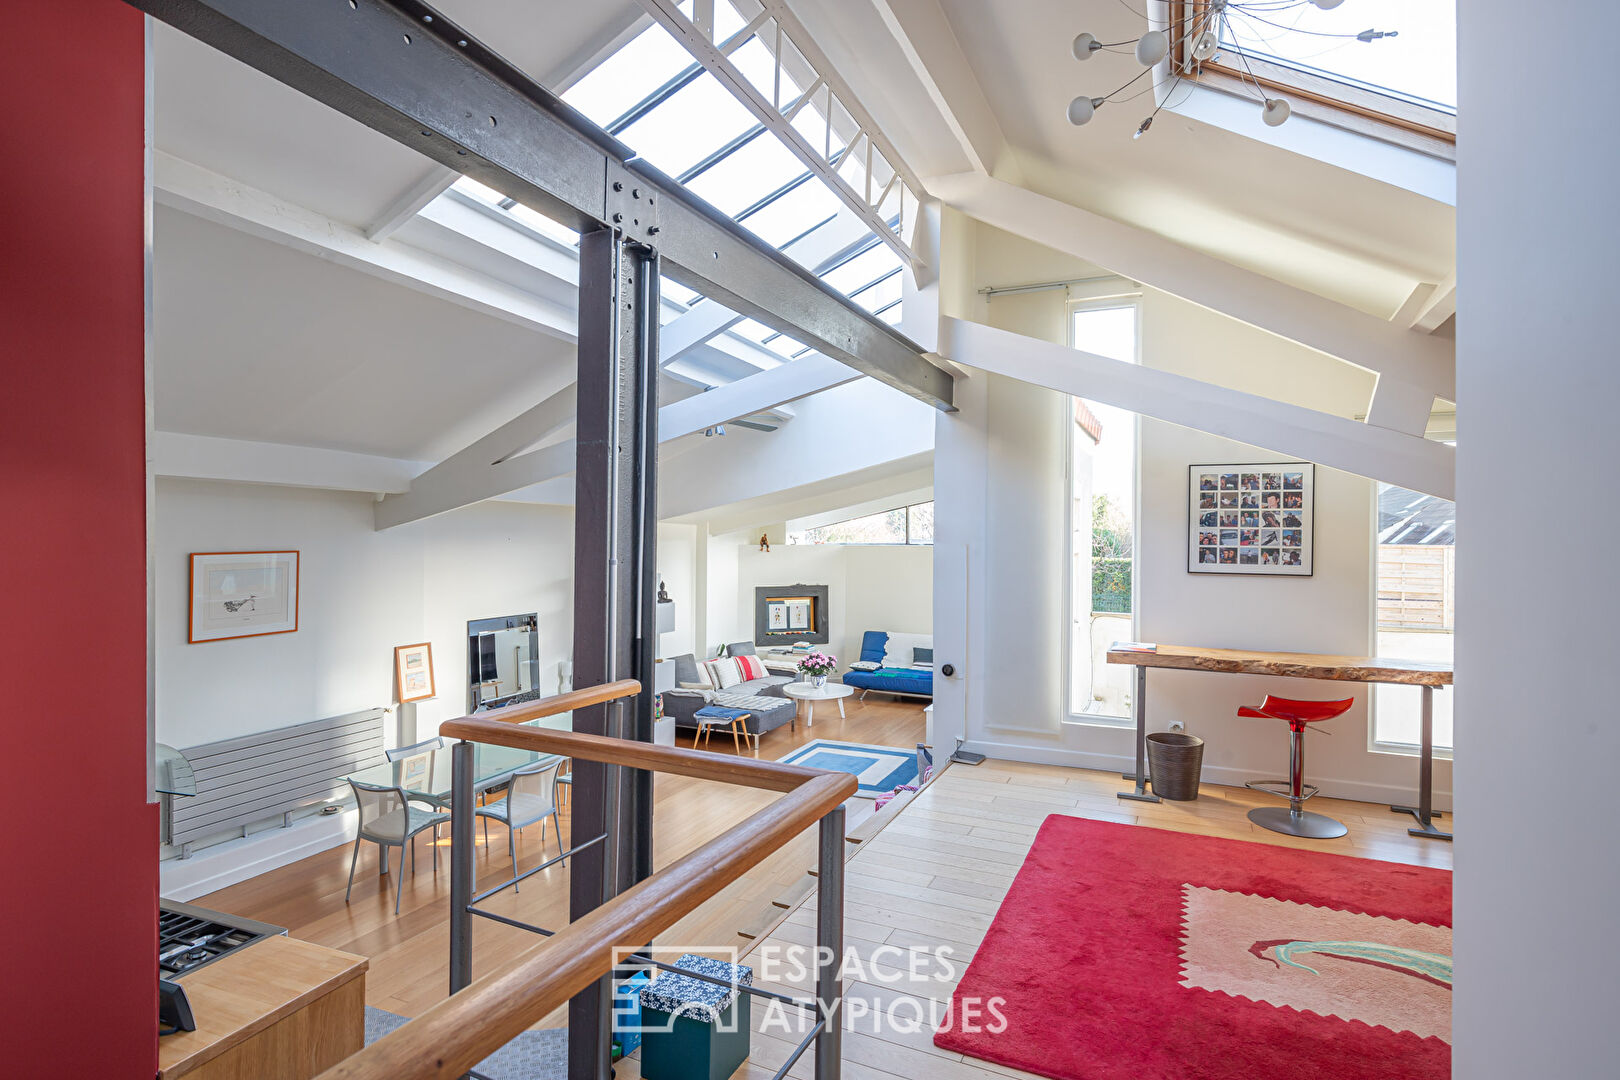 Family loft with cathedral roof